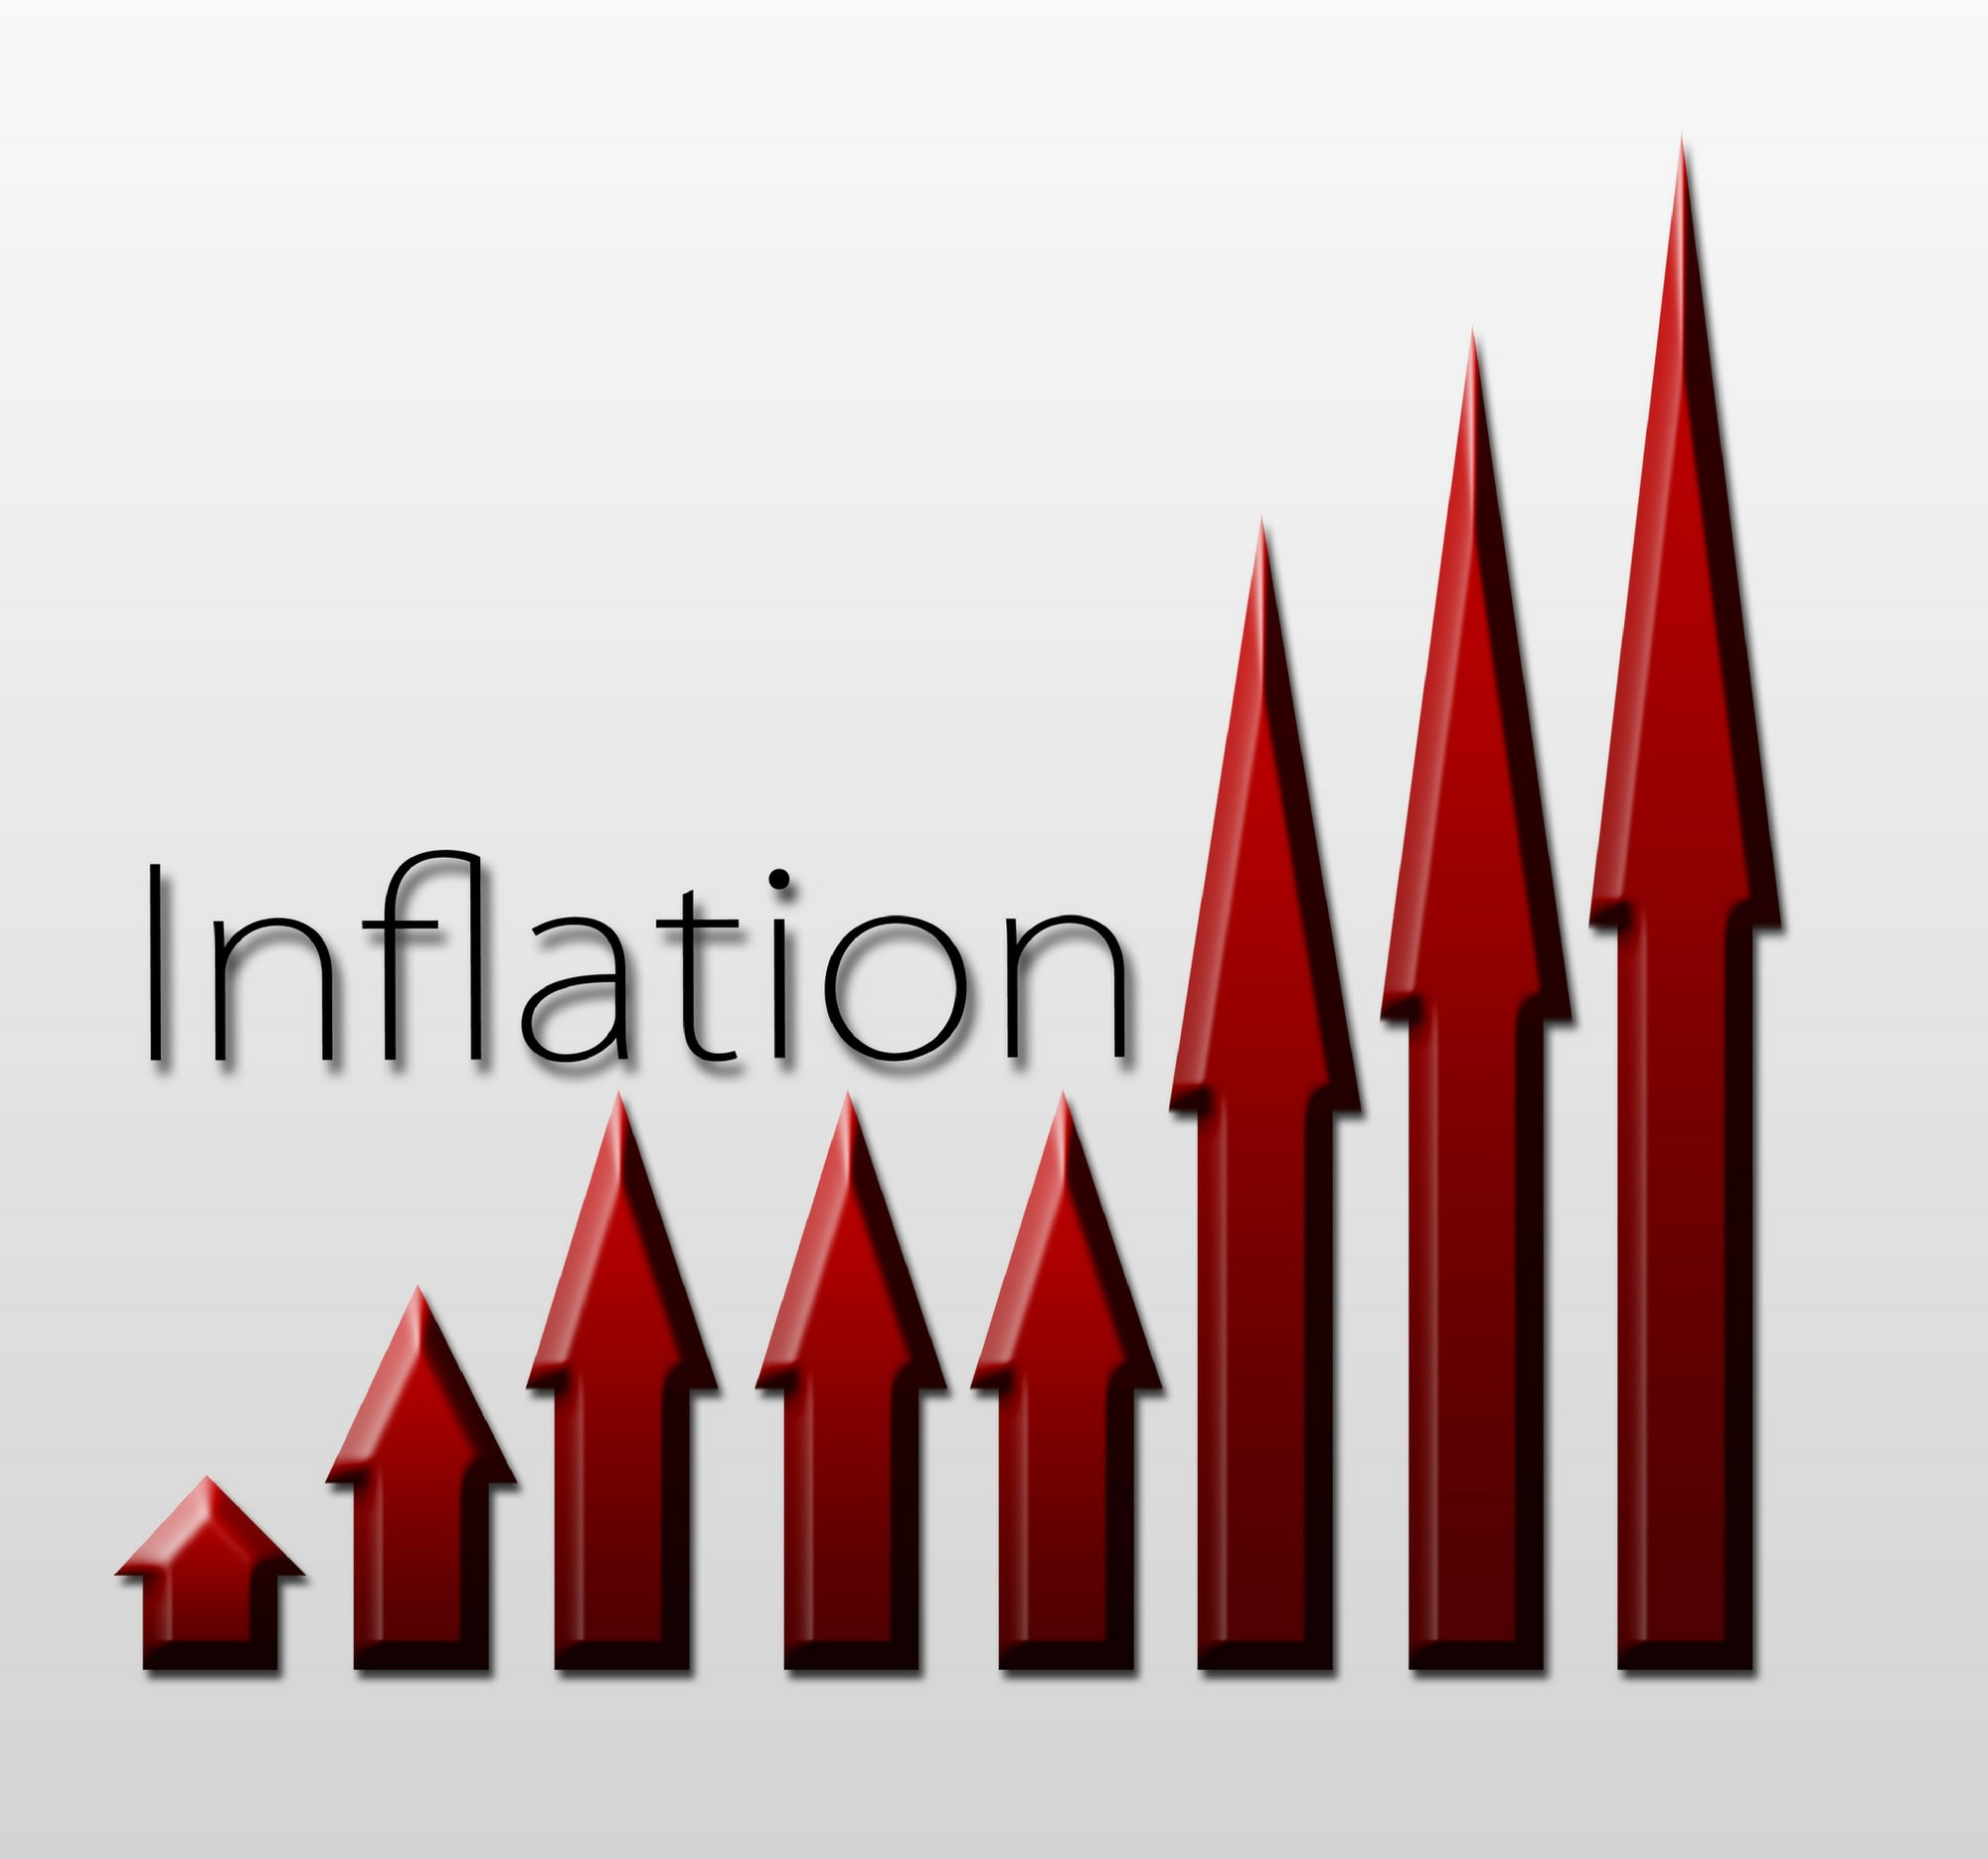 #Inflation#